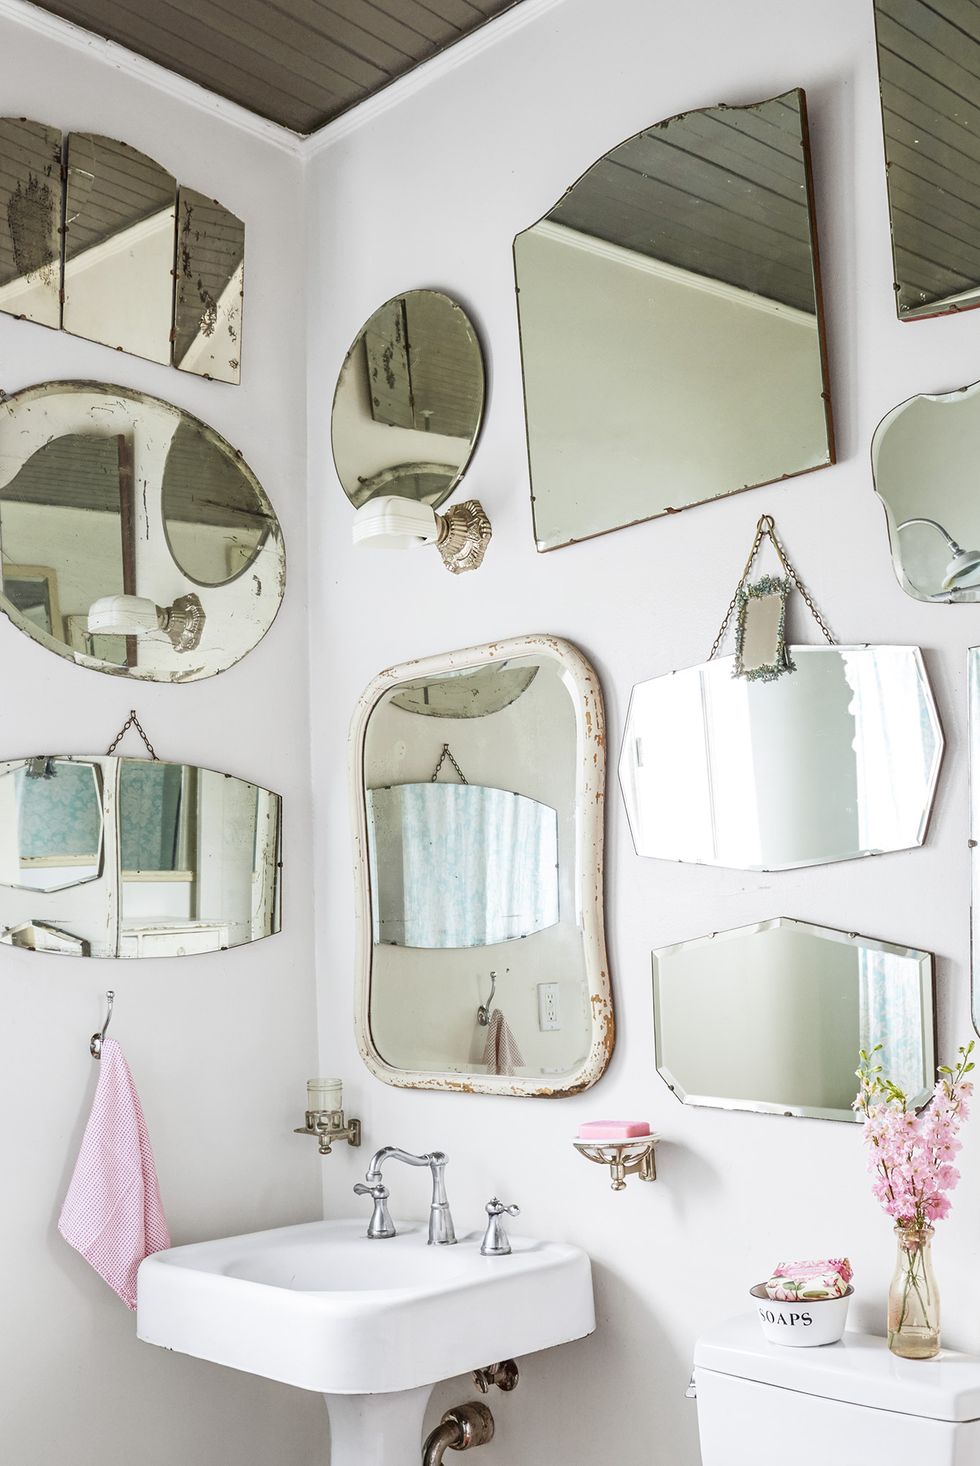 5 Best LED Bathroom Mirrors to Buy in 2023